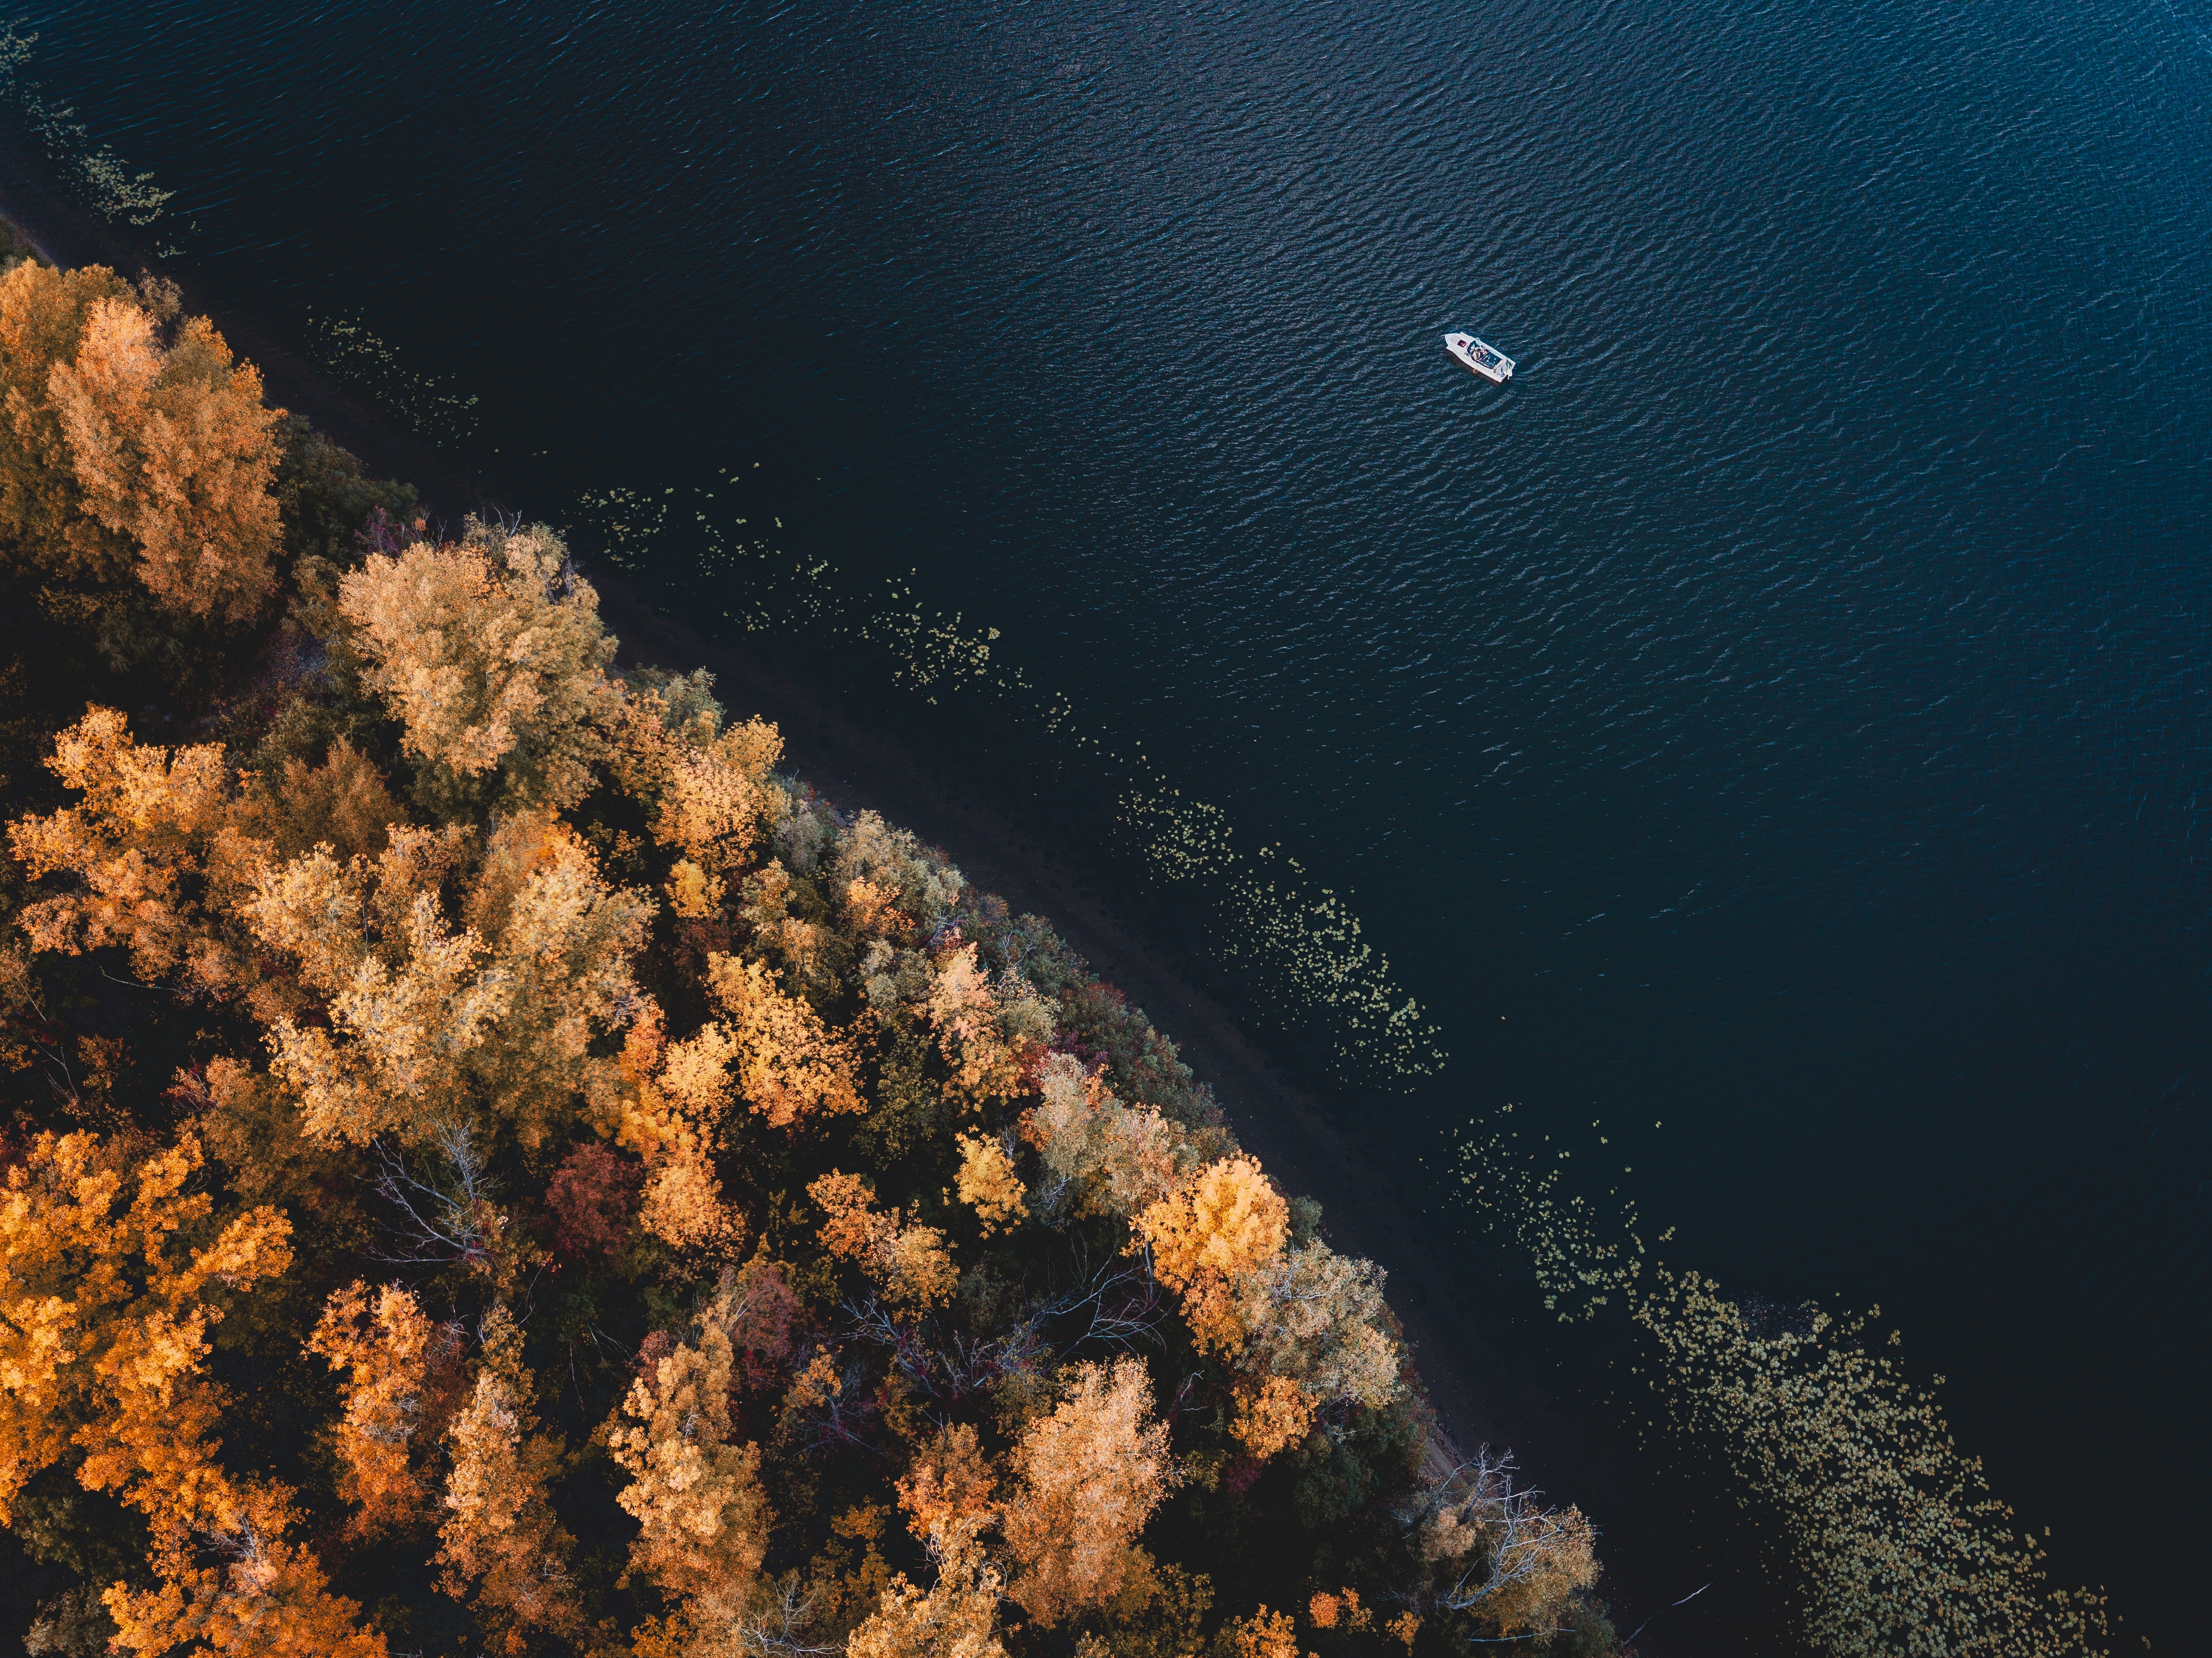 view from above, nature, trees, coast, boat